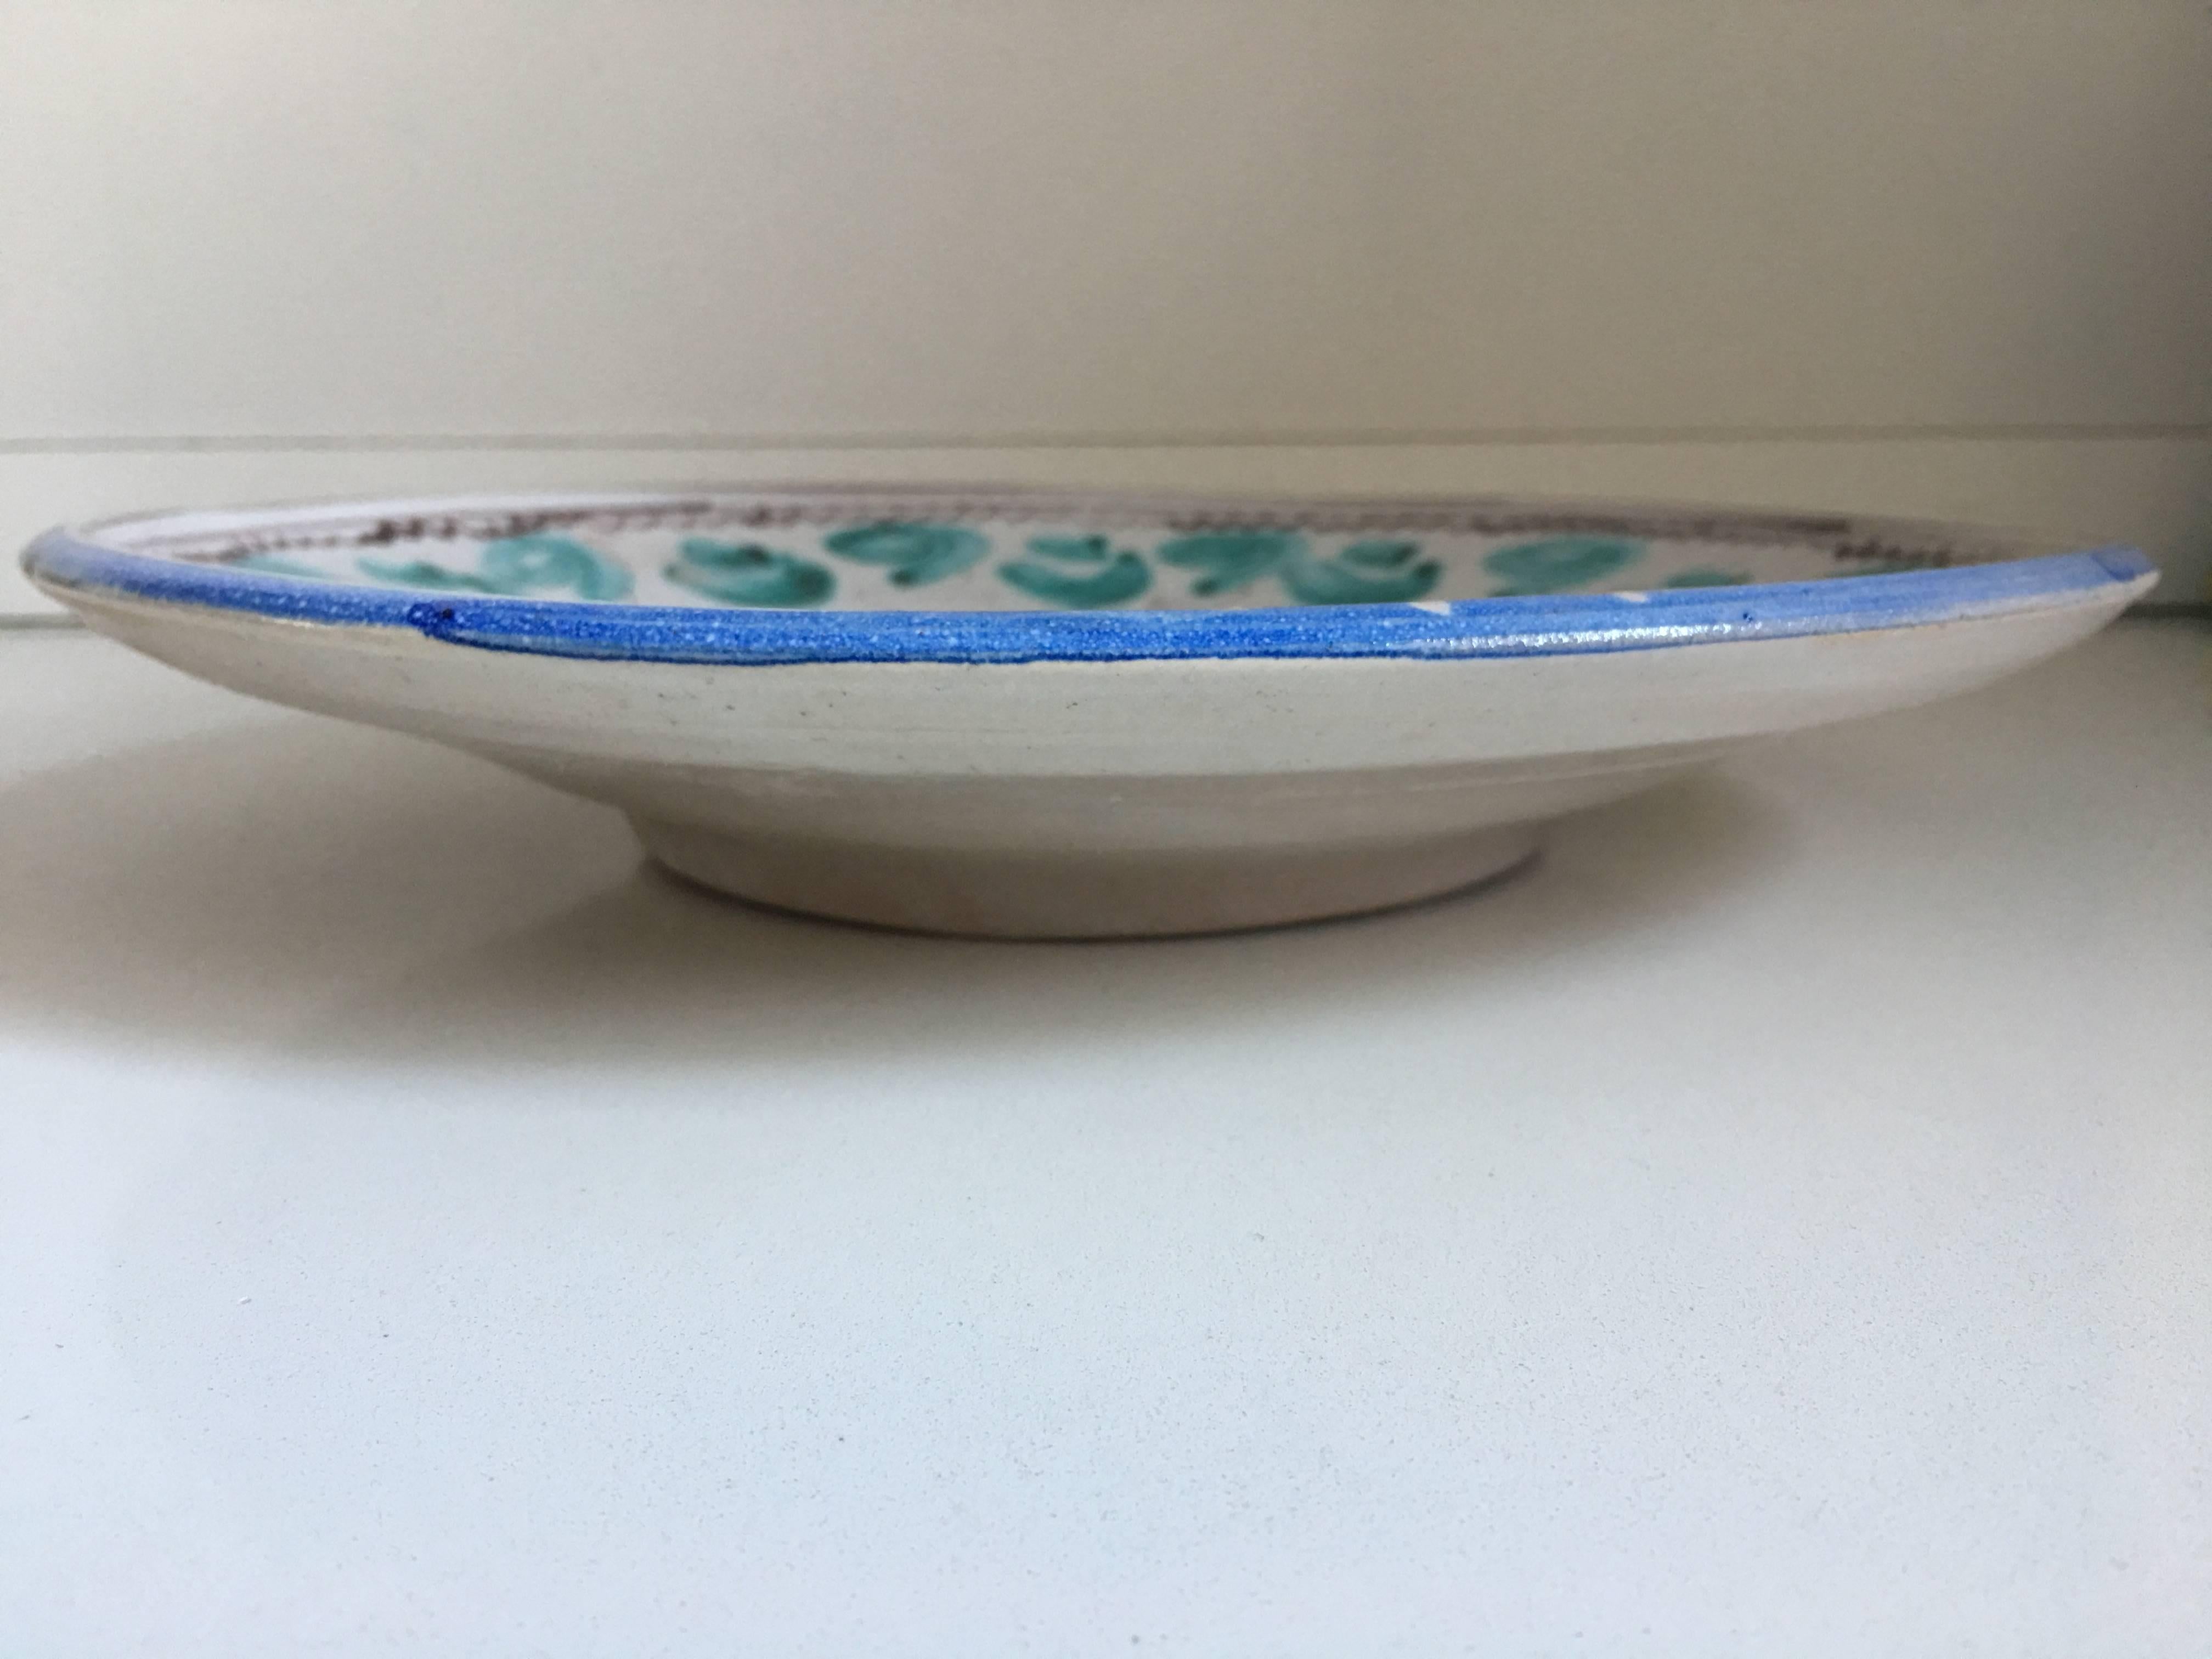 20th century midcentury blue and green ceramic dish or plate.